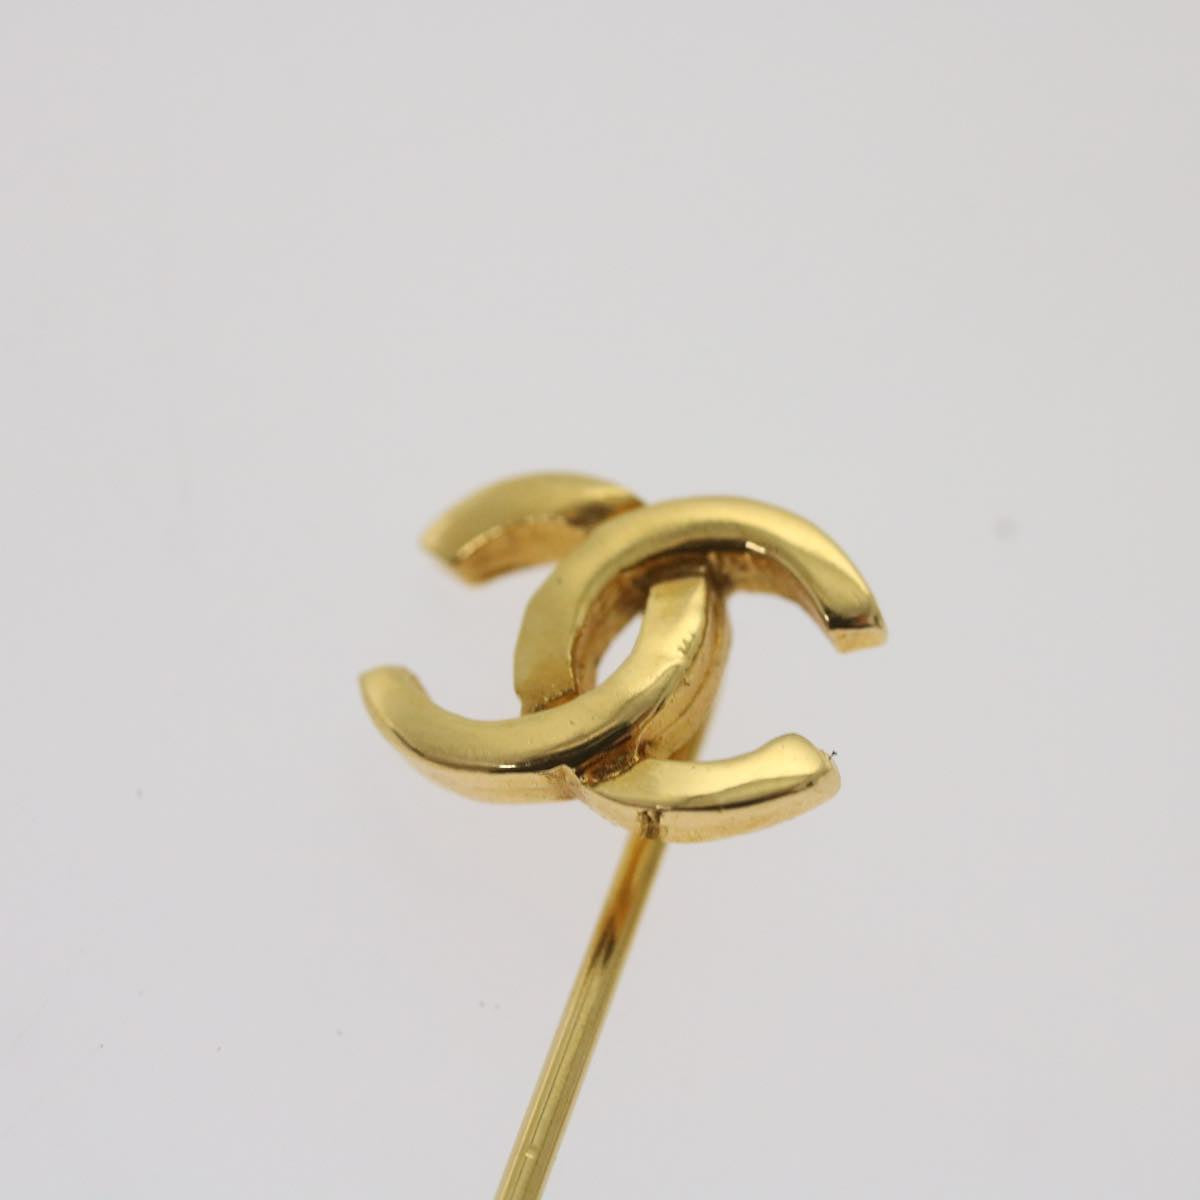 CHANEL Brooch metal Gold Tone CC Auth bs12173